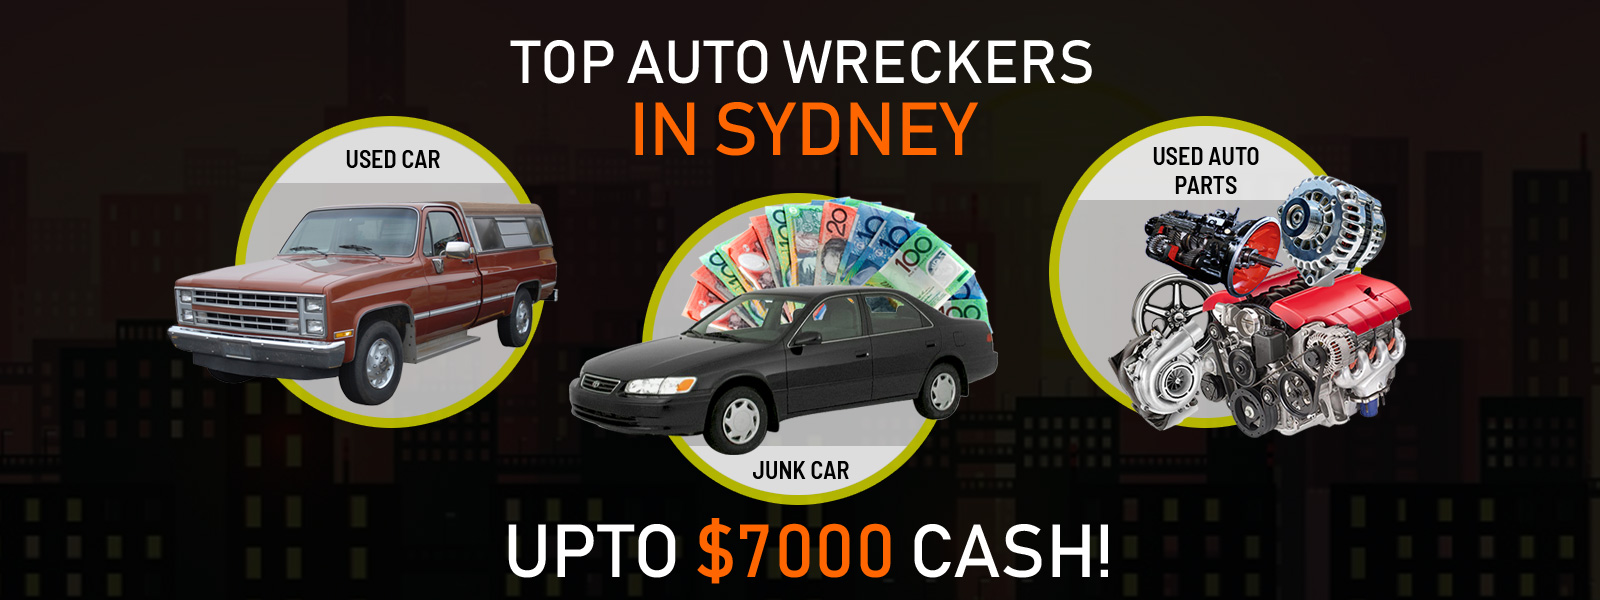 Wrecked Cars Wanted Sydney